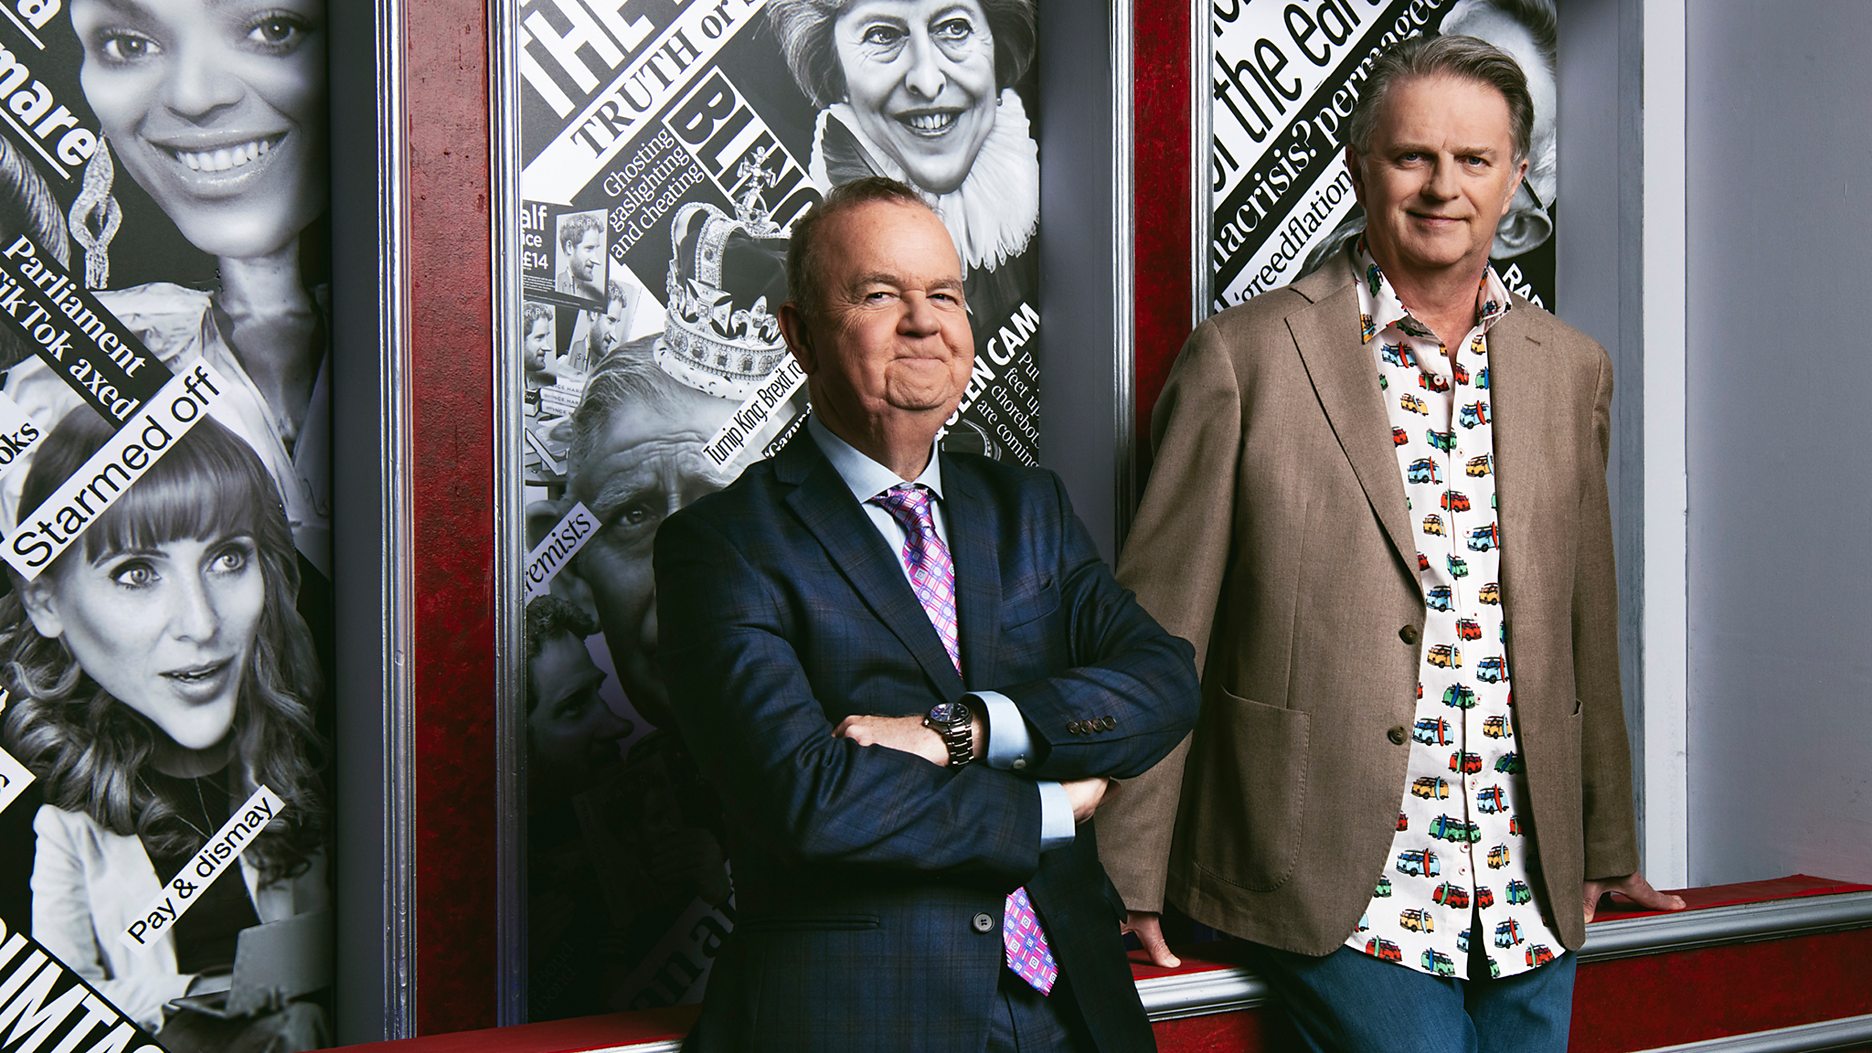 18 things you didn’t know about Have I Got News For You with Ian Hislop and Paul Merton